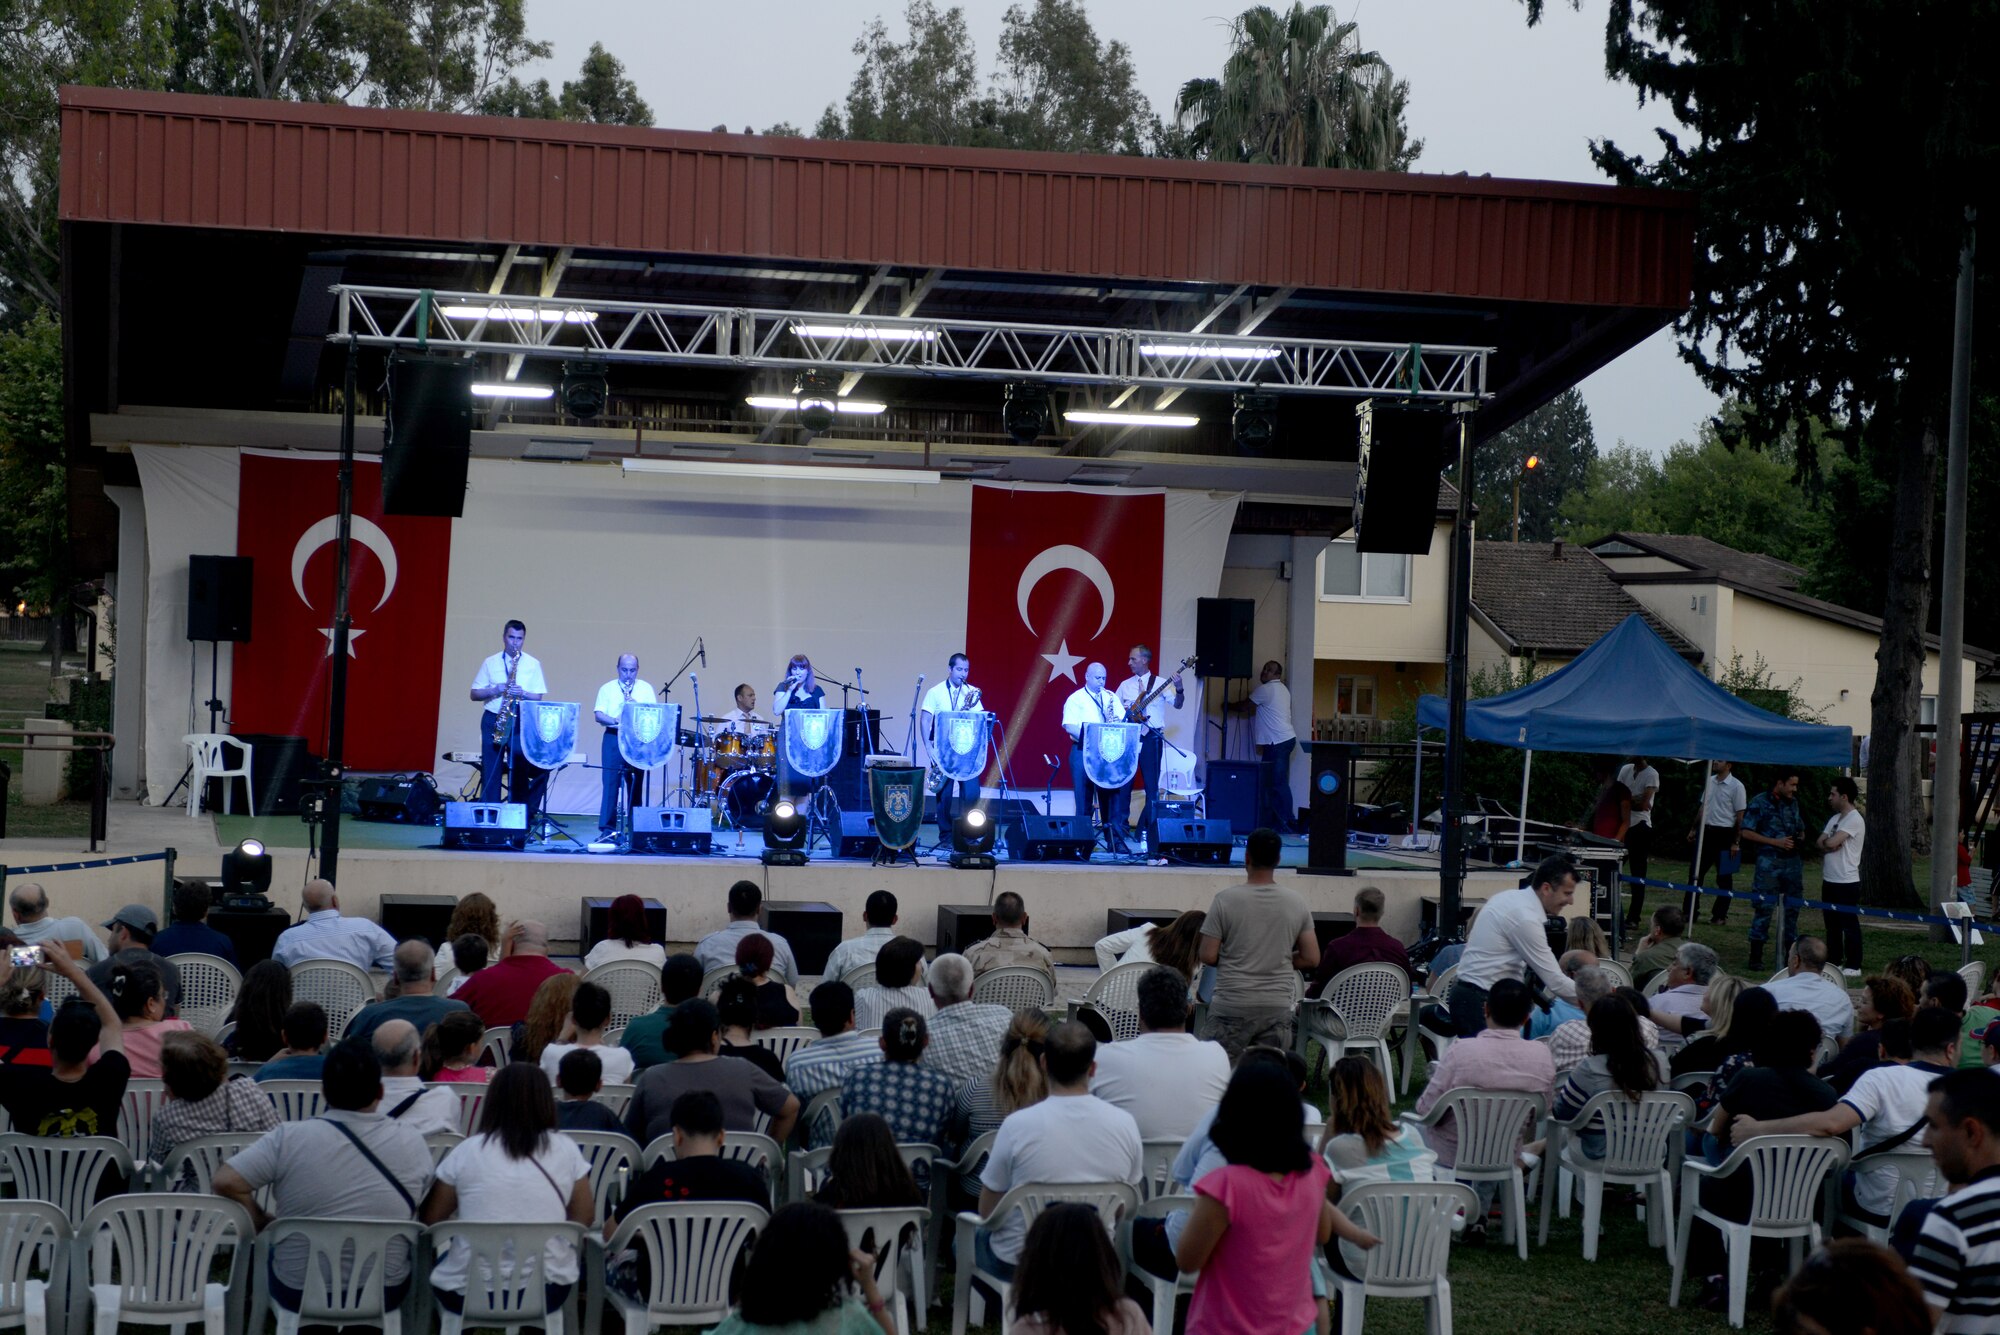 The Turkish Air Force Jazz Band plays a concert for an American and Turkish audience in Arkadas Park June 9, 2013, at Incirlik Air Base, Turkey. The Turkish air force celebrated its 102nd anniversary by inviting members of the Incirlik community to view static displays and enjoy a performance from their jazz band. (U.S. Air Force photo by Tech. Sgt. Dallas Edwards/Released)